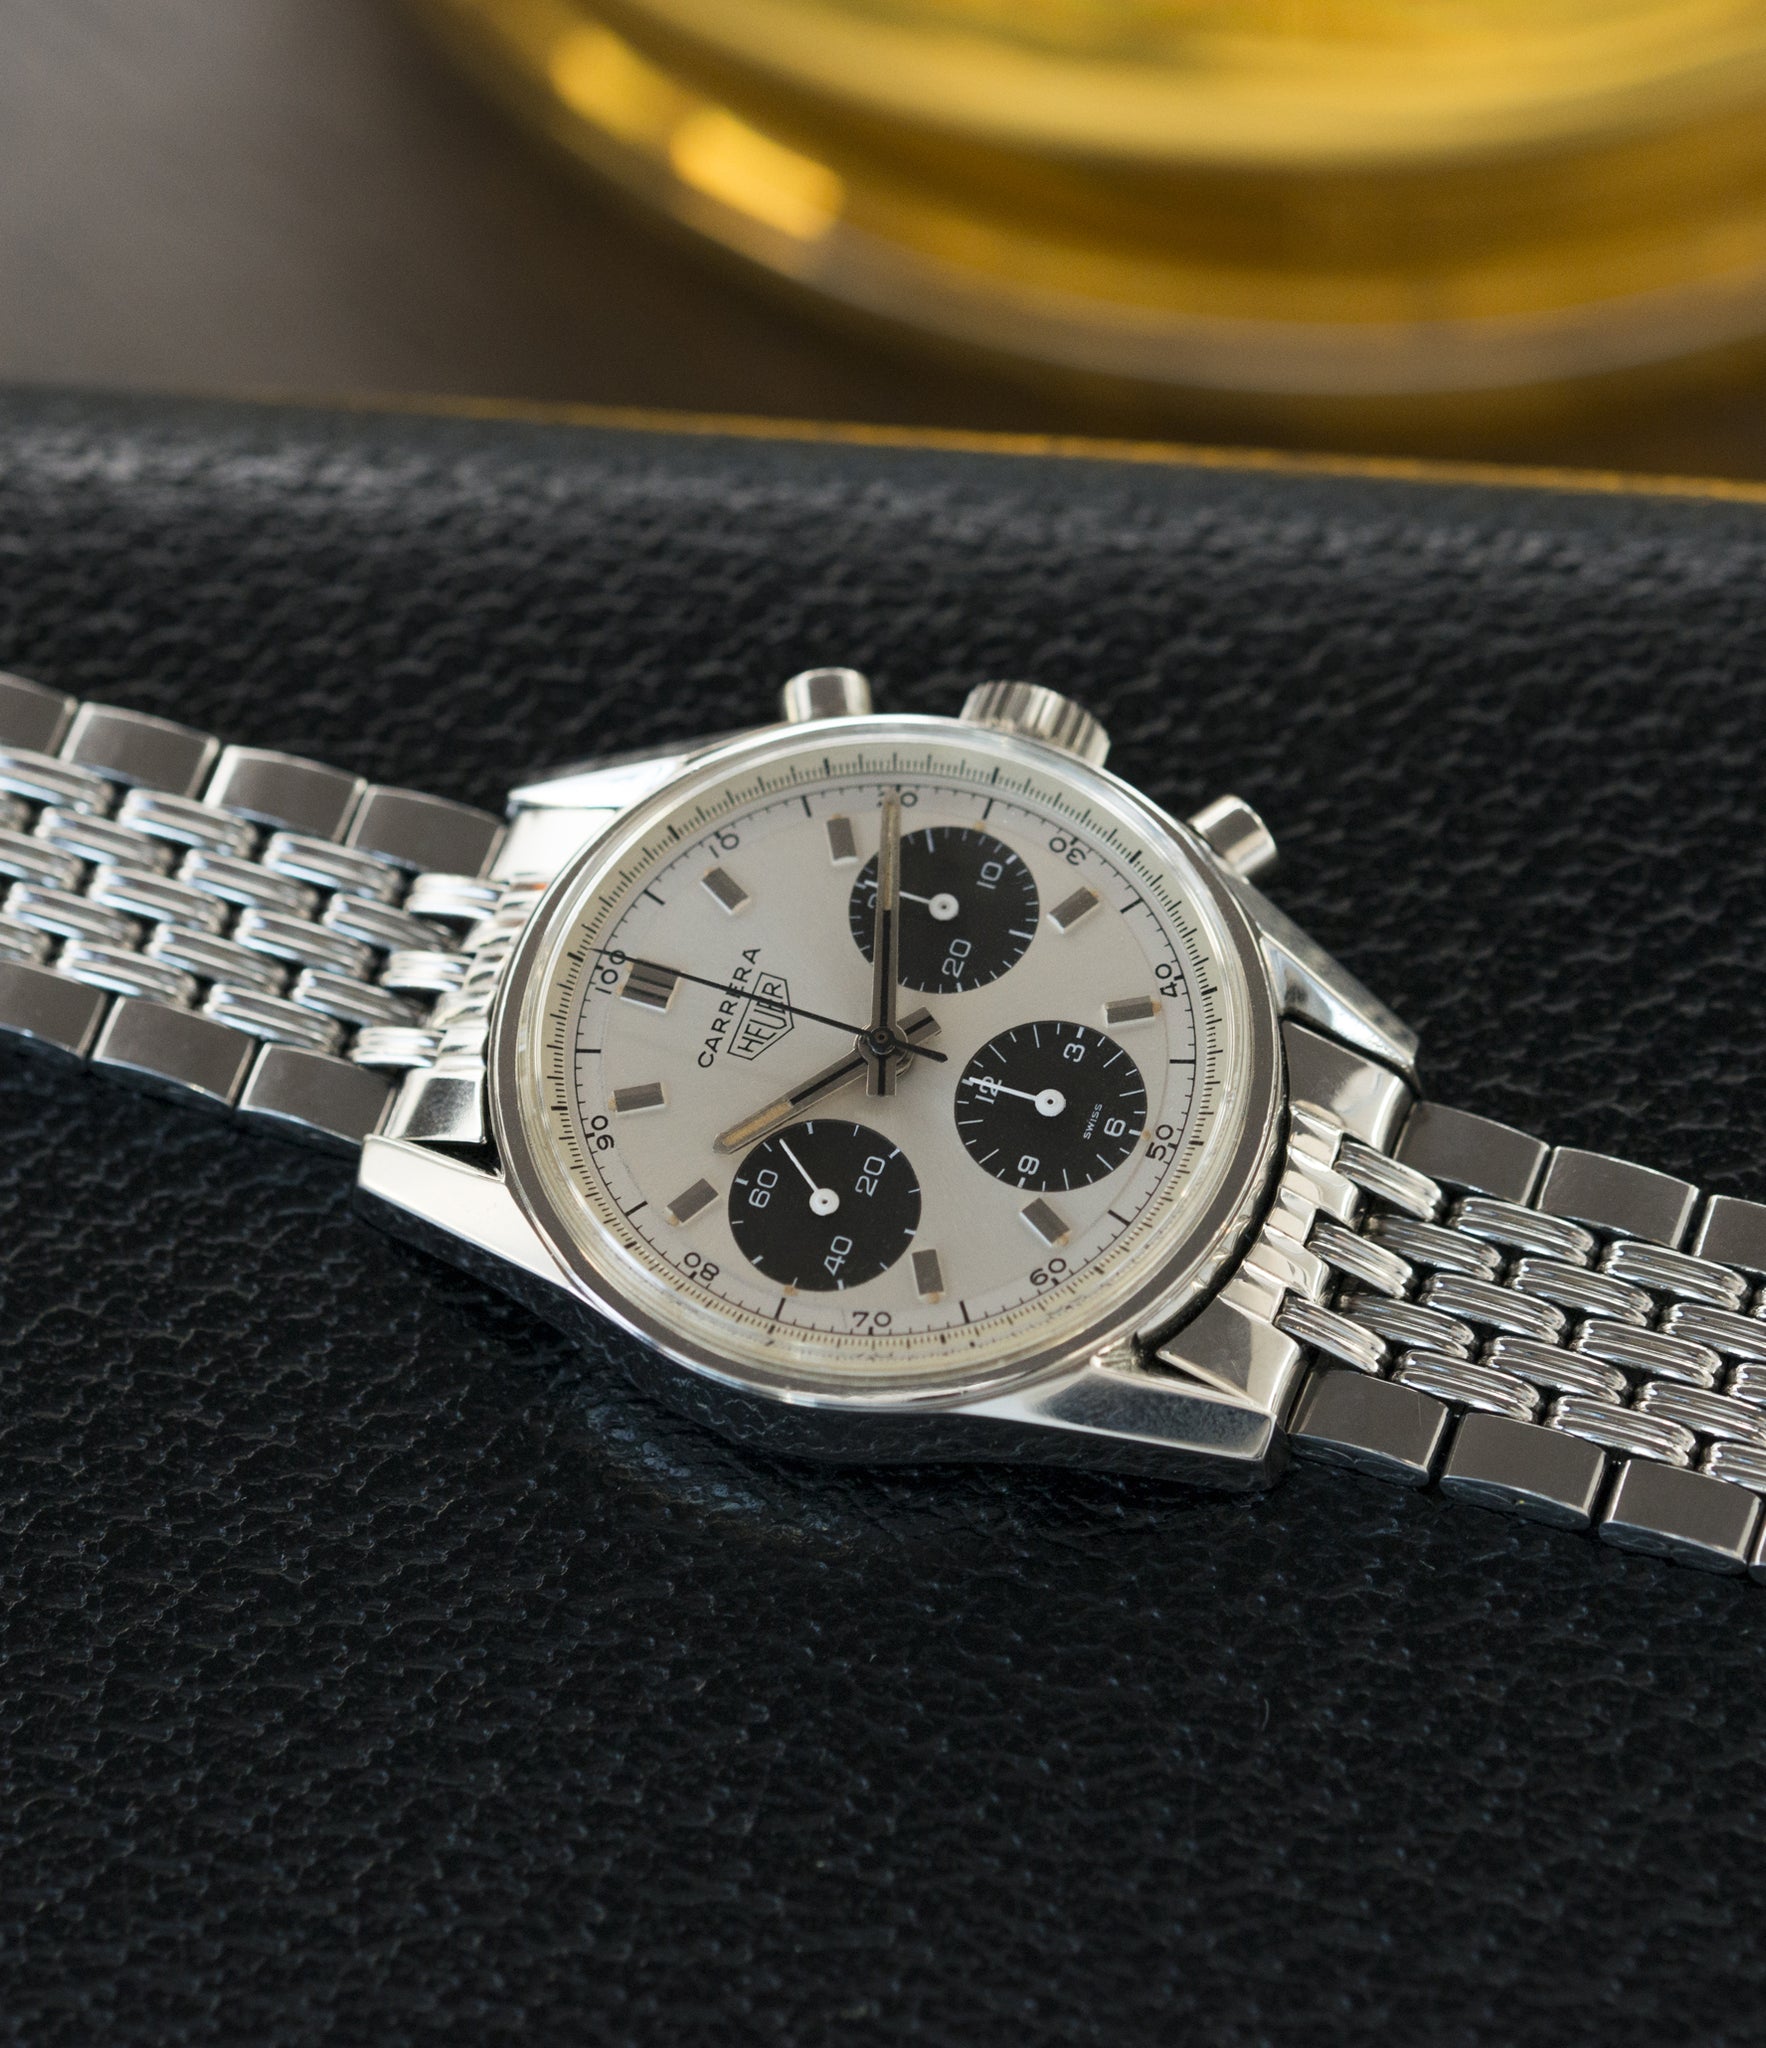 rare Heuer Carrera 2447SND panda dial steel sport watch online at A Collected Man London UK specialist of rare vintage watches